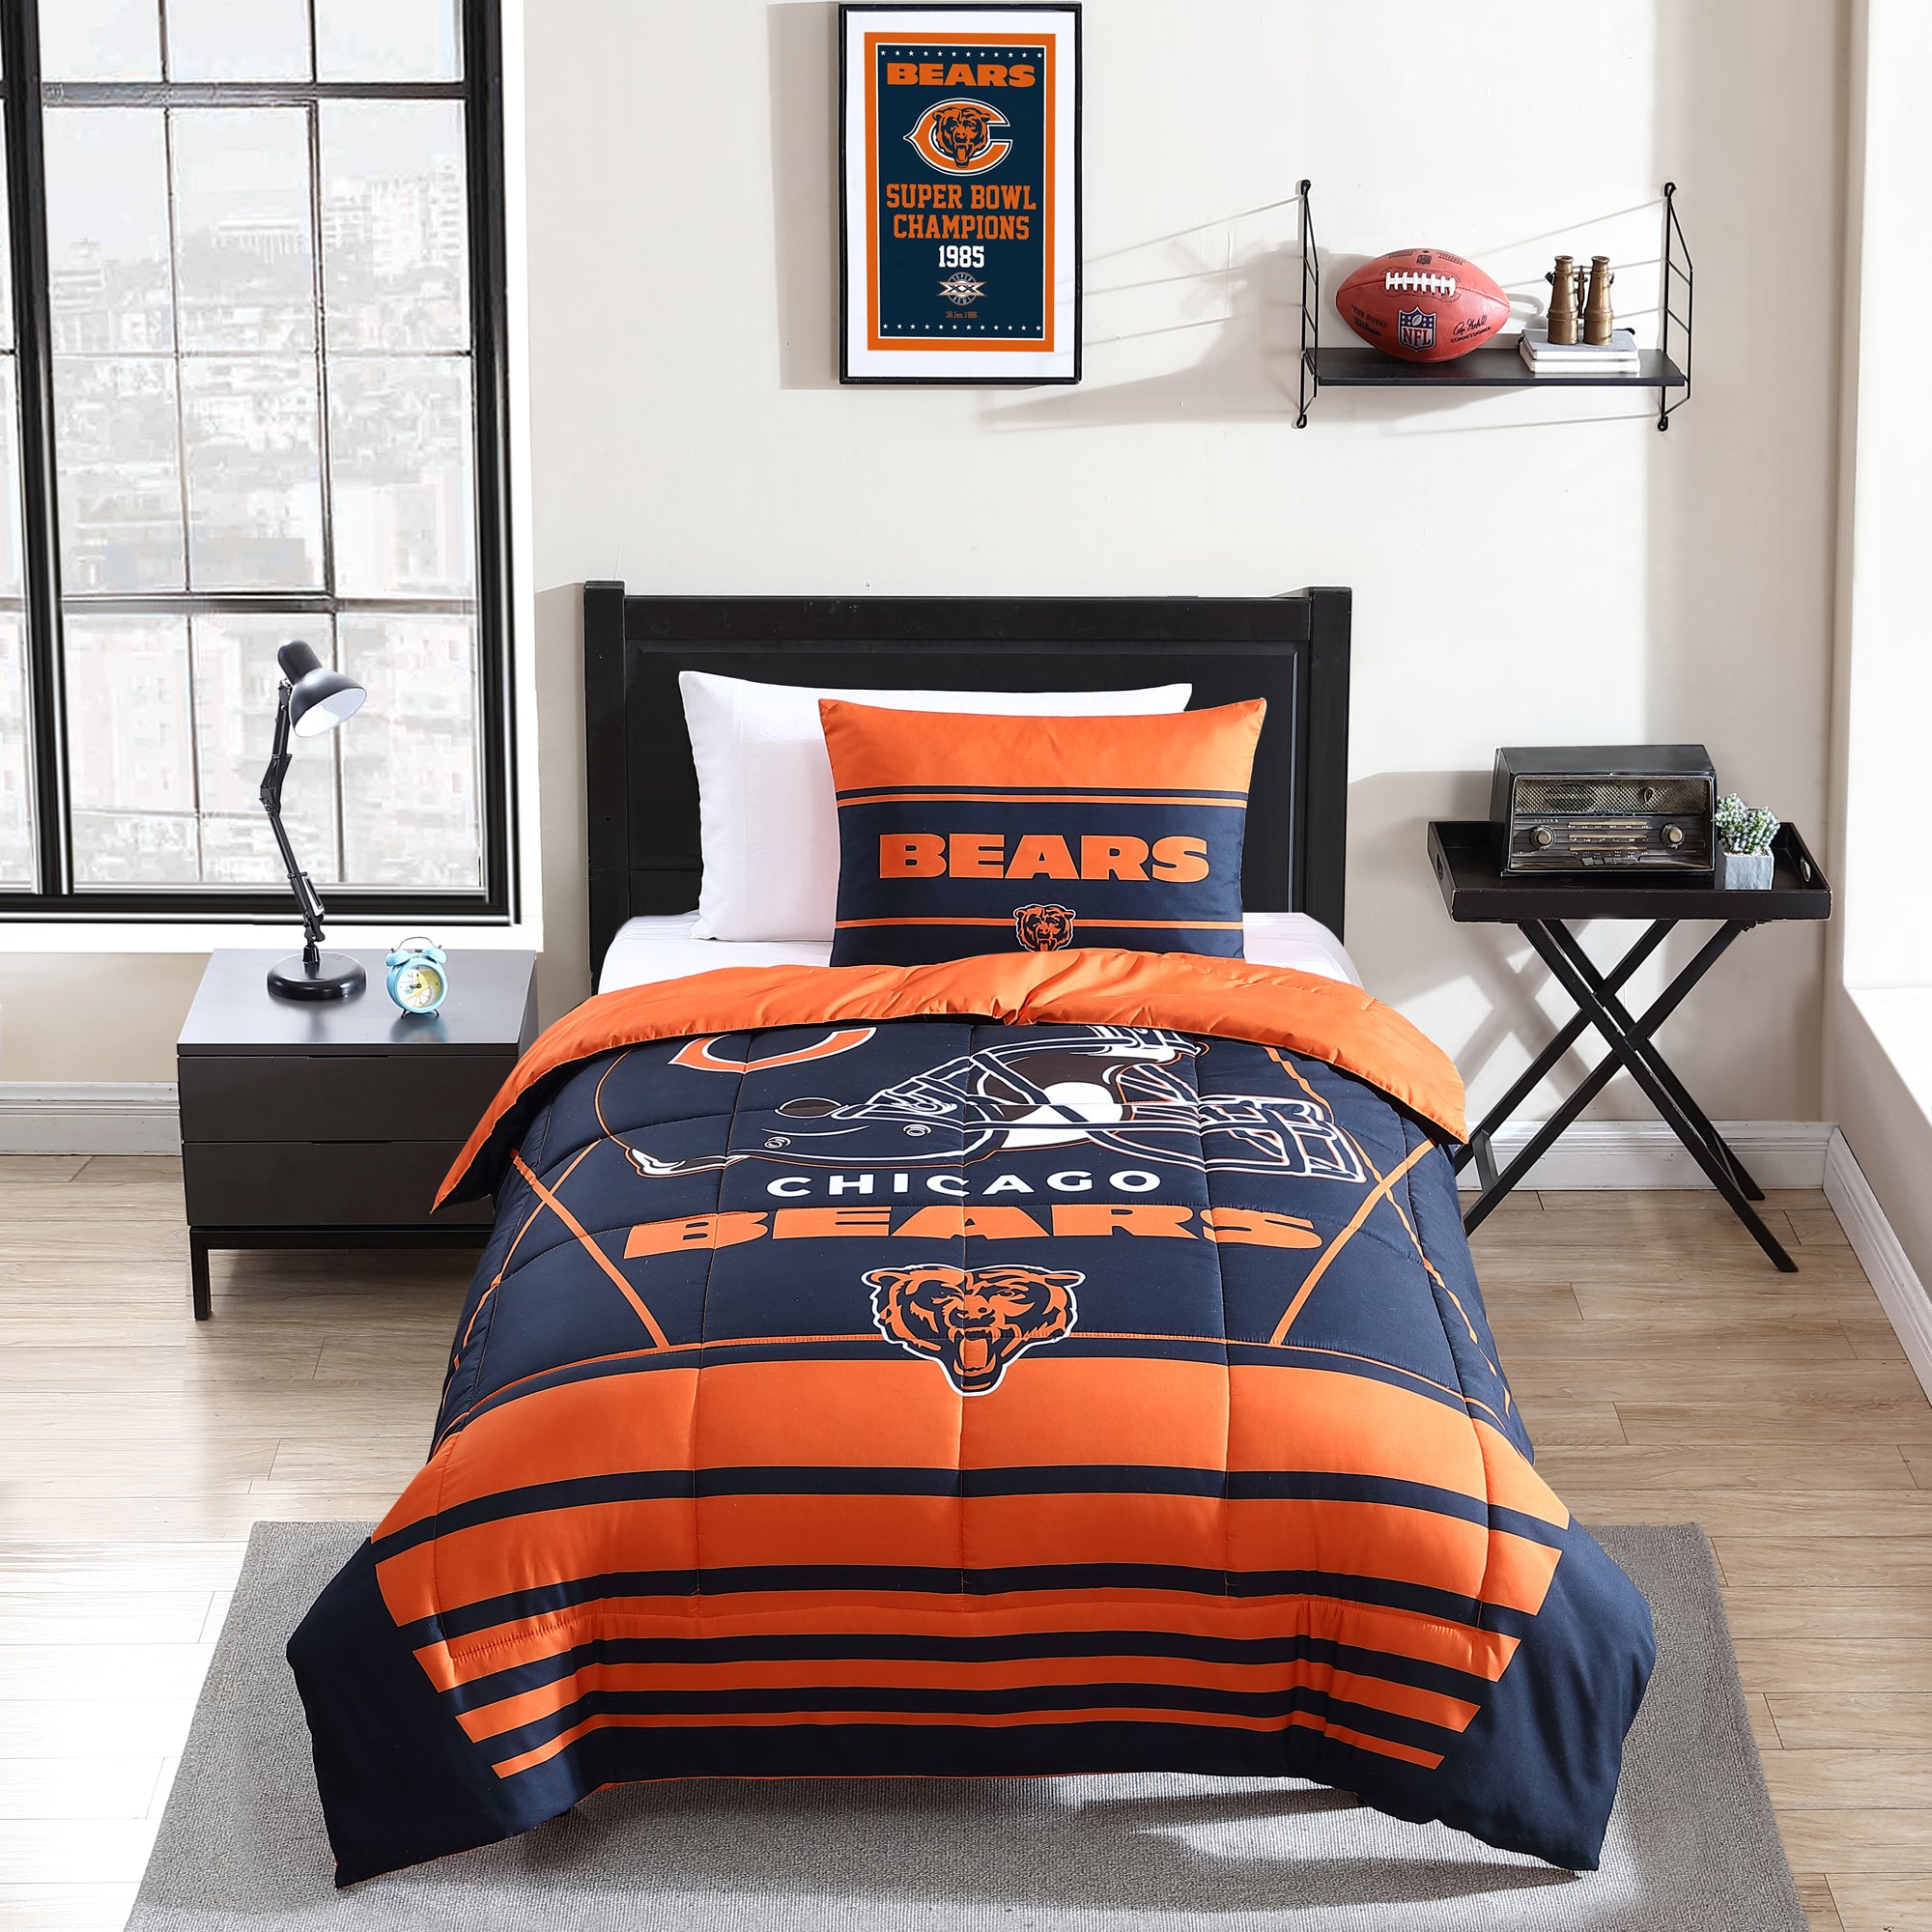 NFL Chicago Bears Comforter Set with Sham - TWIN